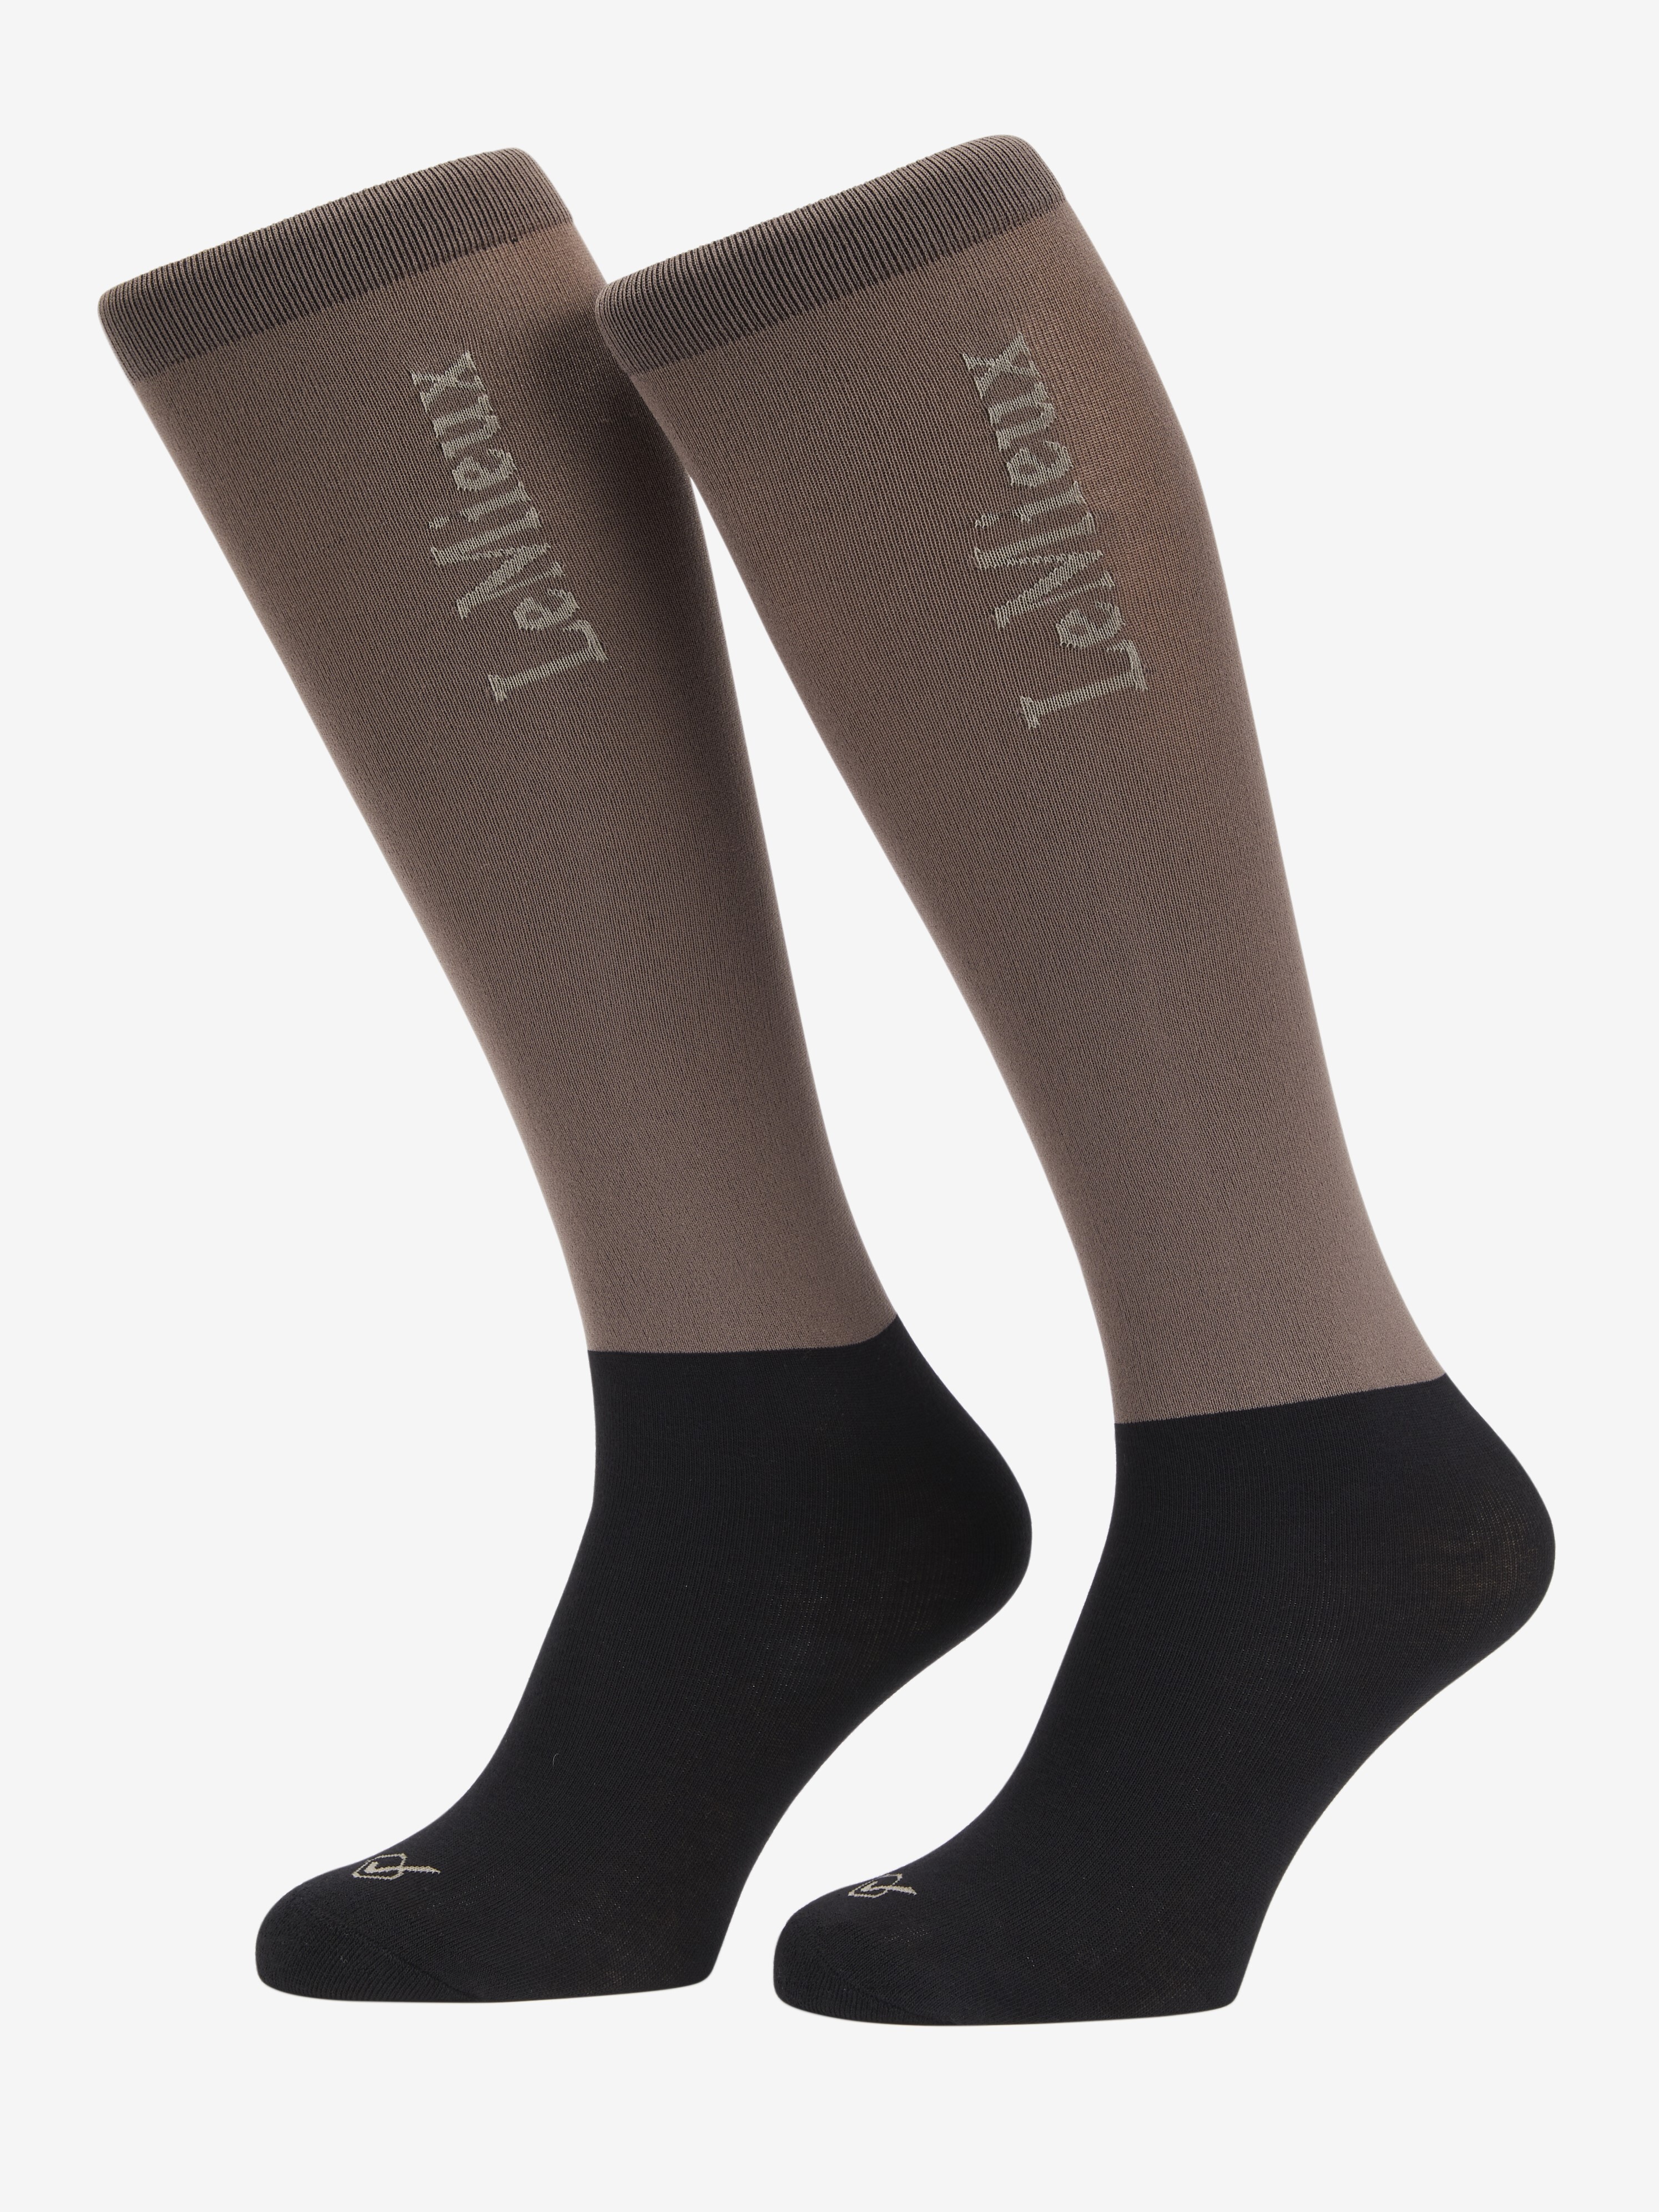 Competition Socks 2 Pack Walnut Clothing